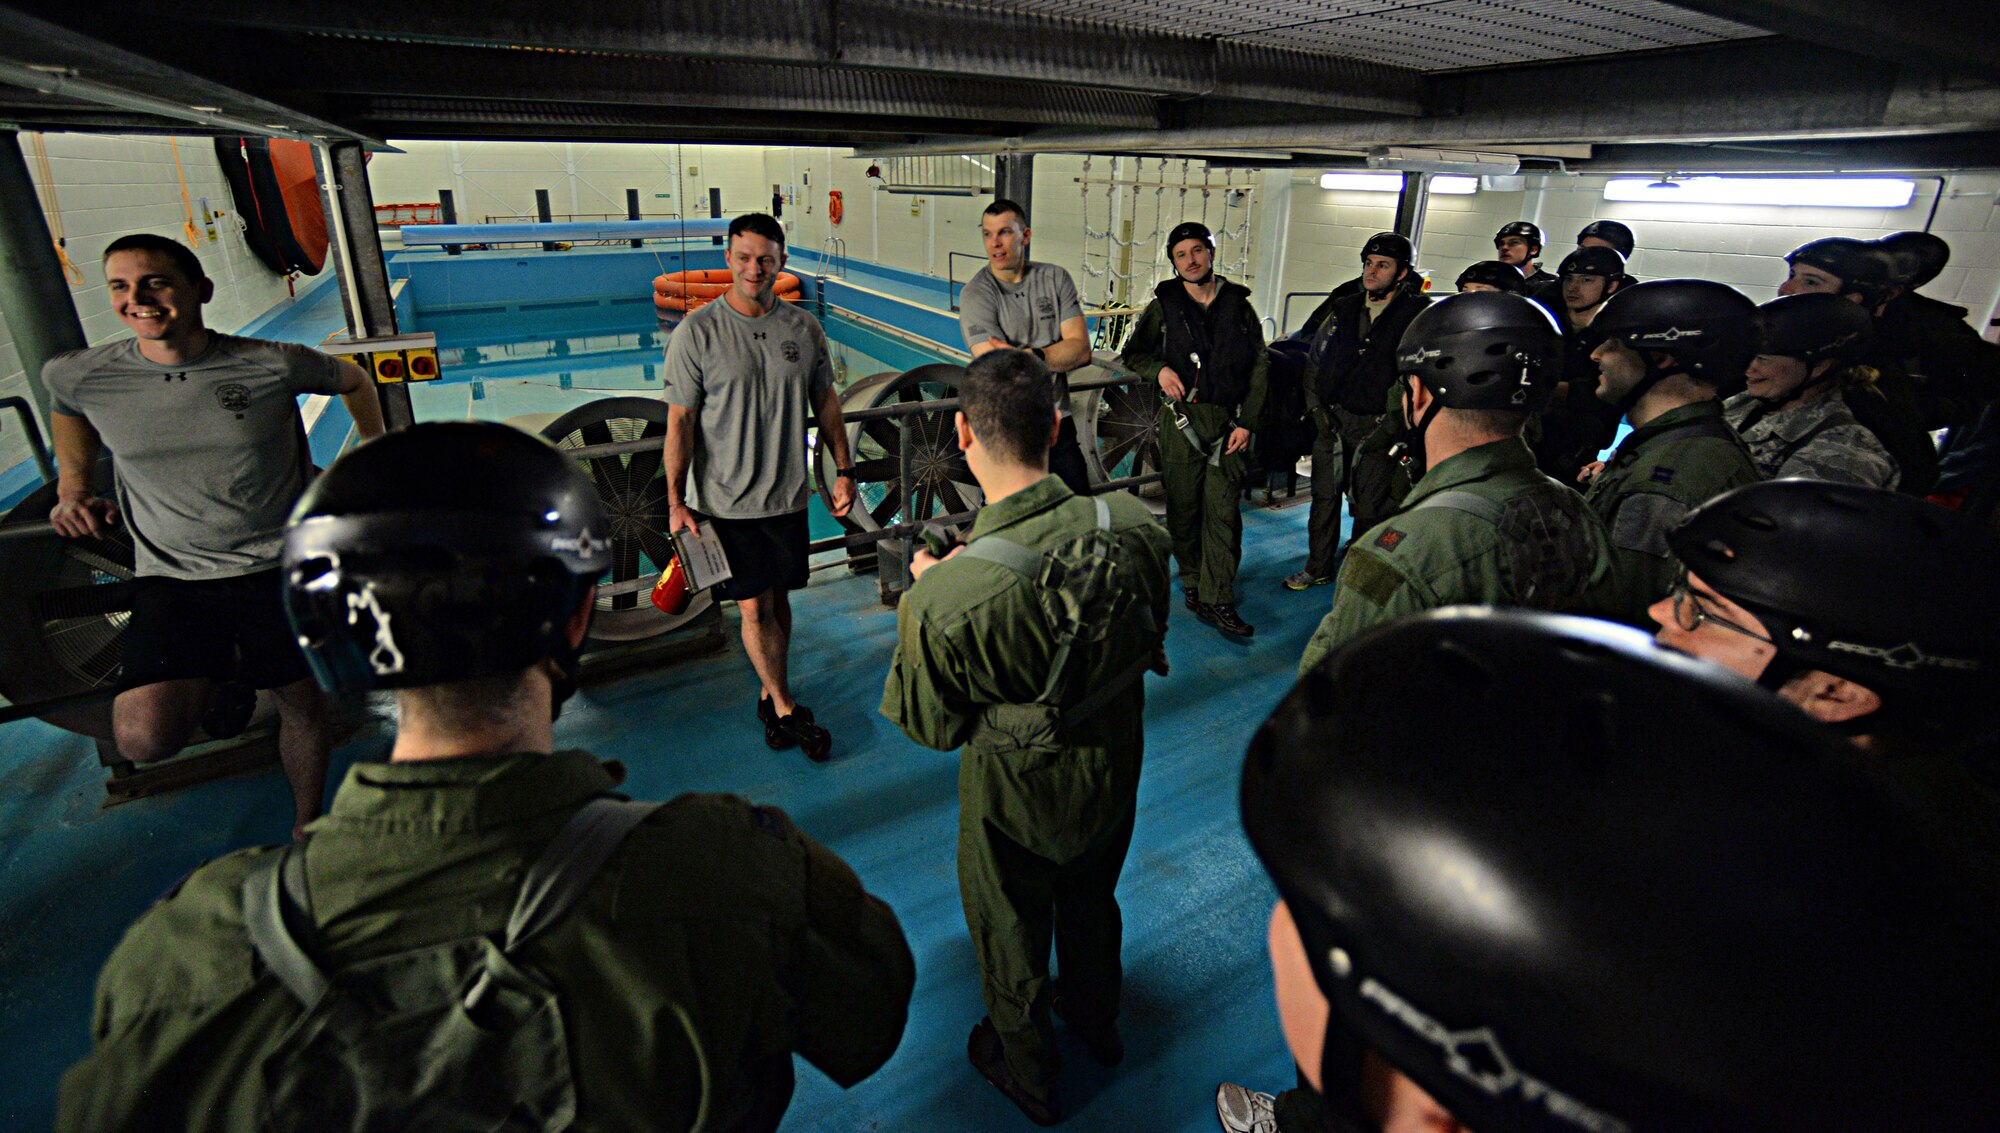 U.S. Air Force instructors and students gather for an initial briefing before conducting training March 10, 2017, at Lowestoft College, Maritime and Offshore Facilities, England. Airmen from the 100th Air Refueling Wing, and 352nd Special Operations Wing from RAF Mildnehall, England, and 48th Fighter Wing from RAF Lakenheath, England, receive refresher training every three years, which consists of hand-to-hand combatives, combat survival training and water survival training. (U.S. Air Force photo by Senior Airman Christine Halan)